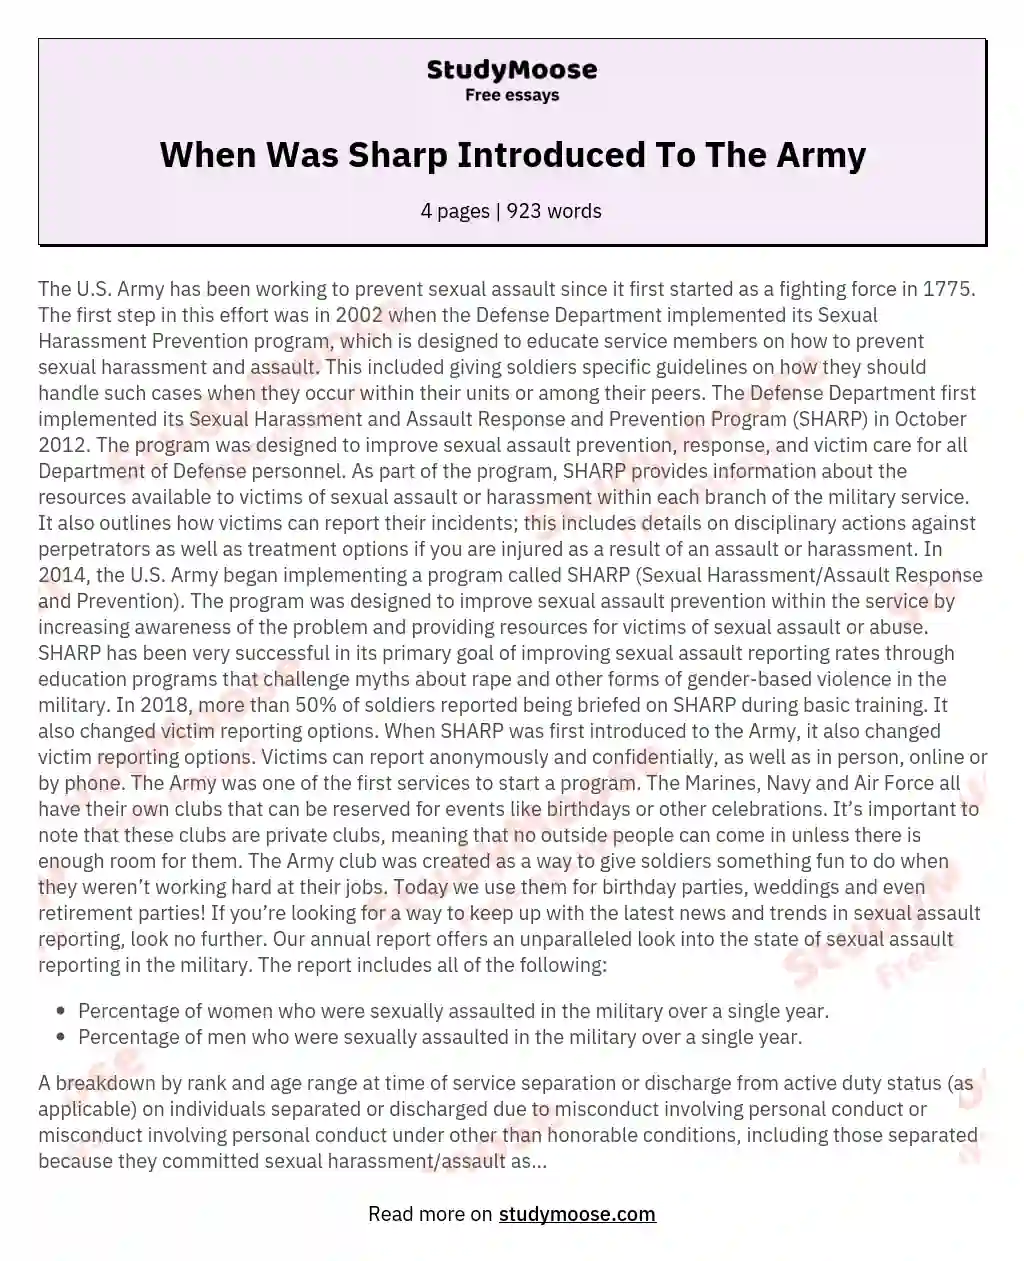 When Was Sharp Introduced To The Army essay